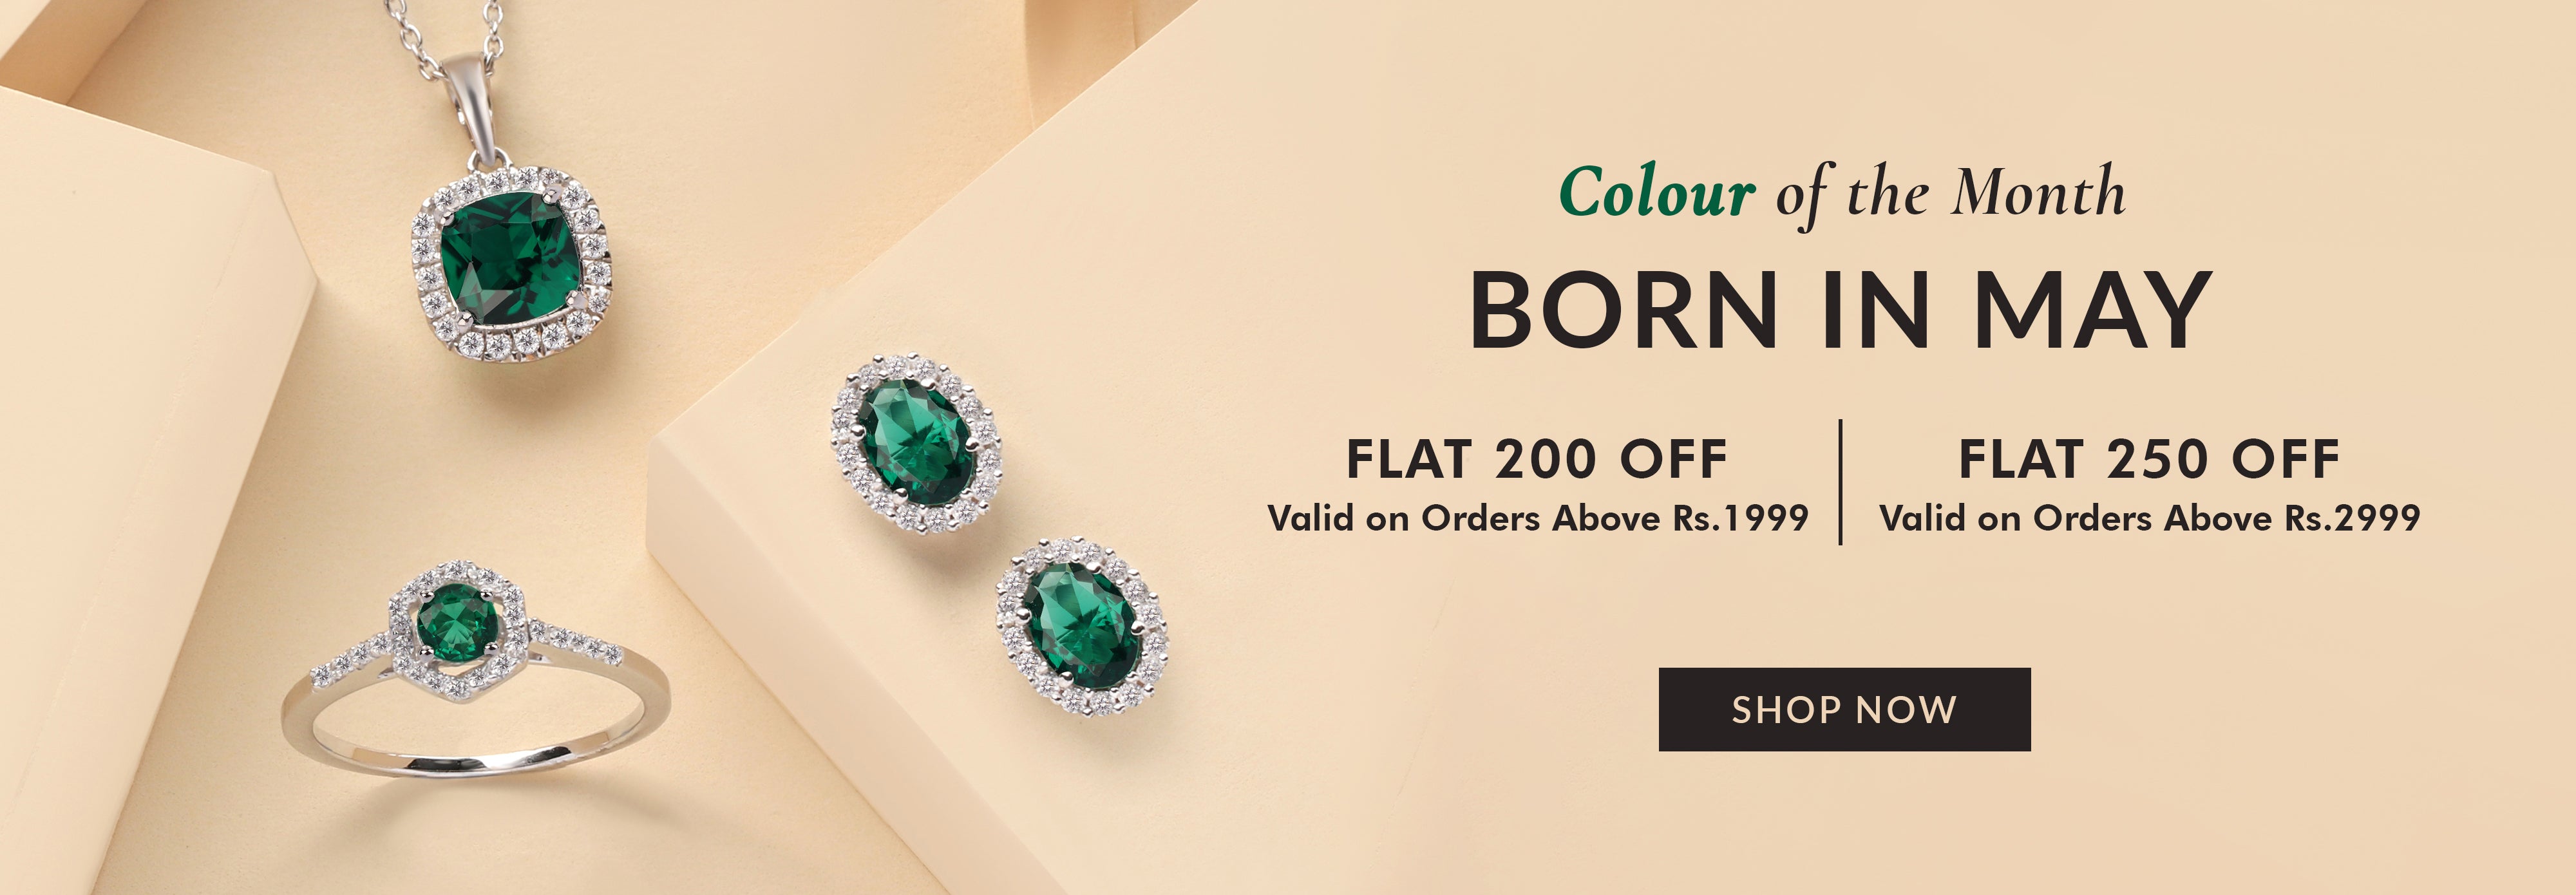 Buy pure 925 silver Birthstone of may jewellery, emerald earrings, emerald rings, emerald necklace